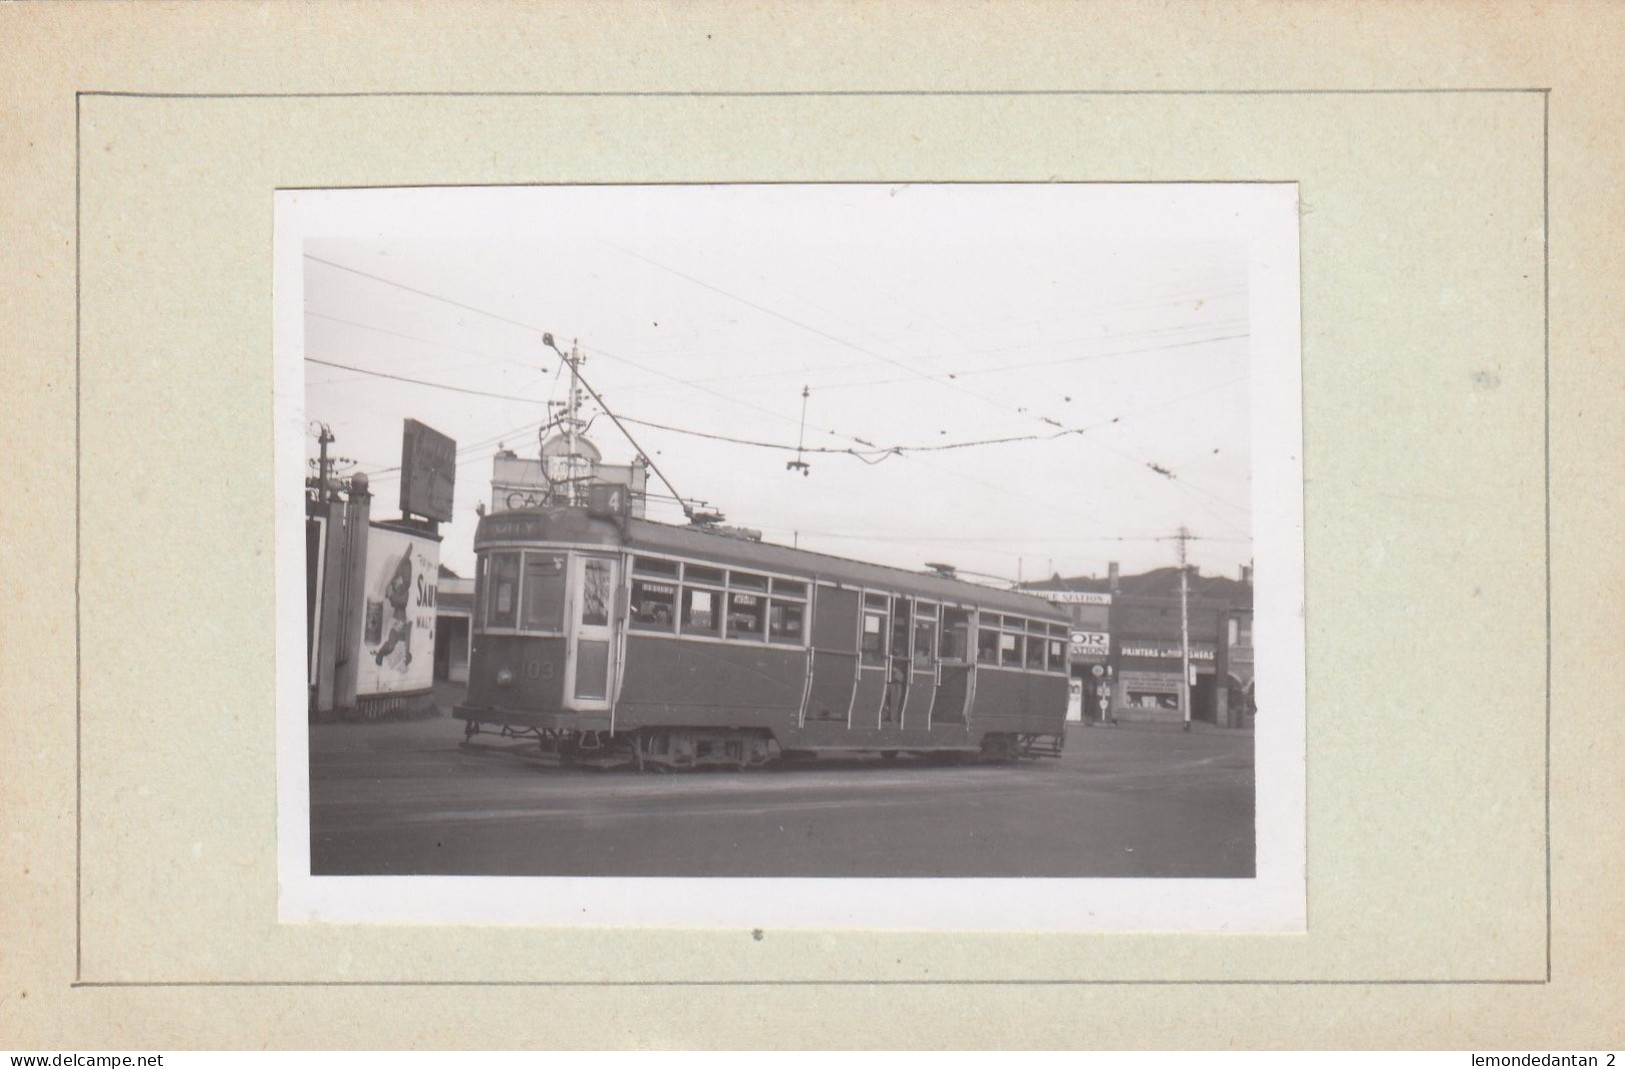 Melbourne - Railway - Tramway - Photo 8 X 6 Cm Pasted On Carton (2 Scans) - Melbourne